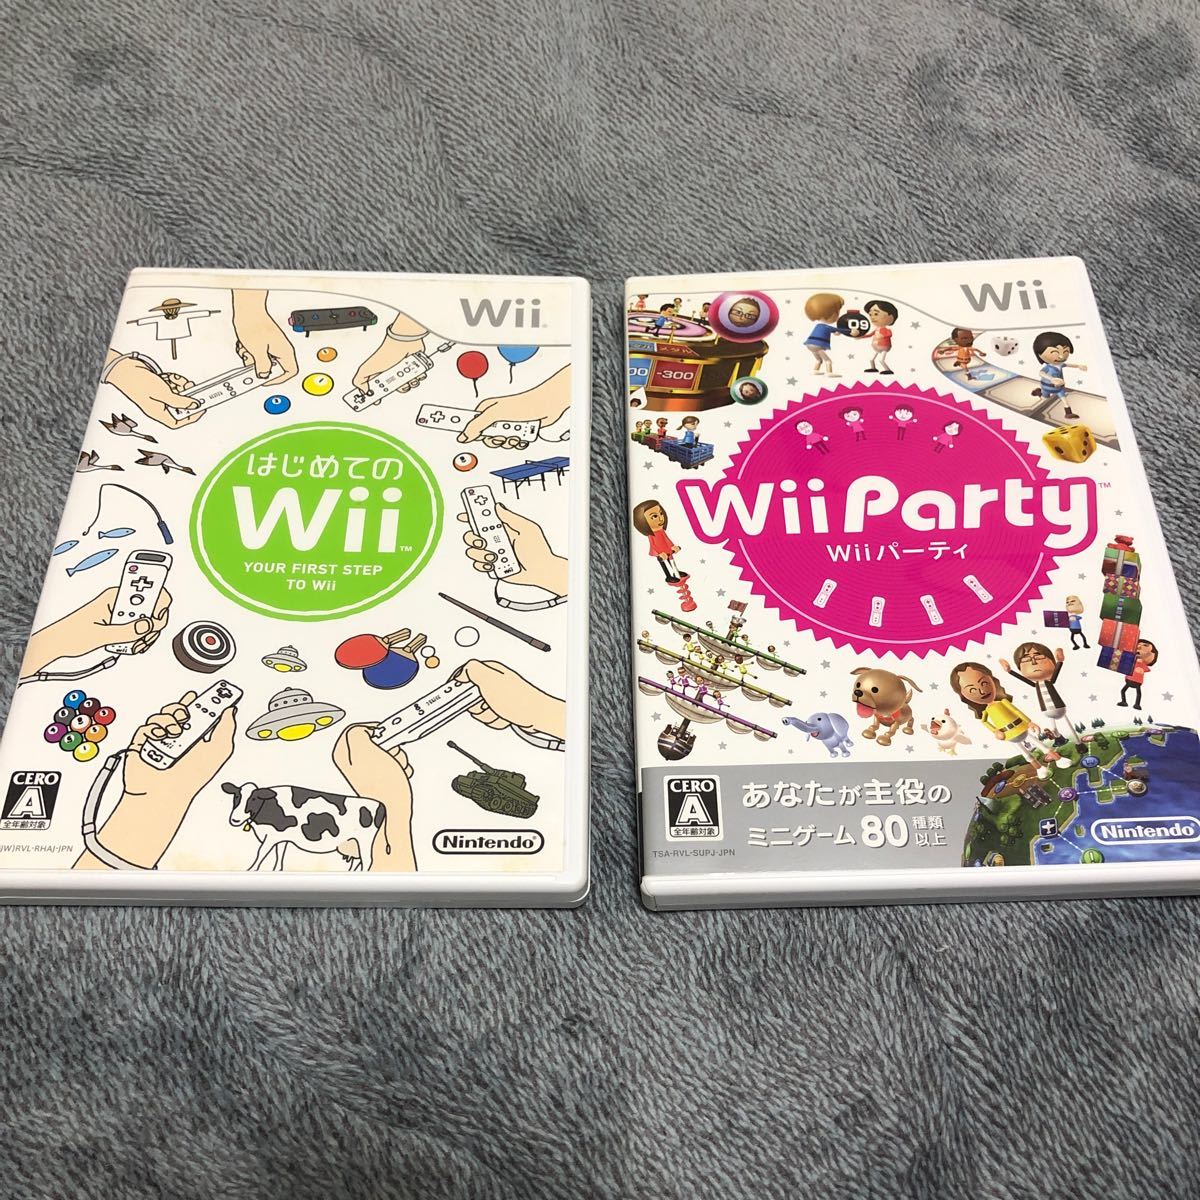 【Wii】 Wii Party （ソフト単品版）、はじめてのWii セット販売